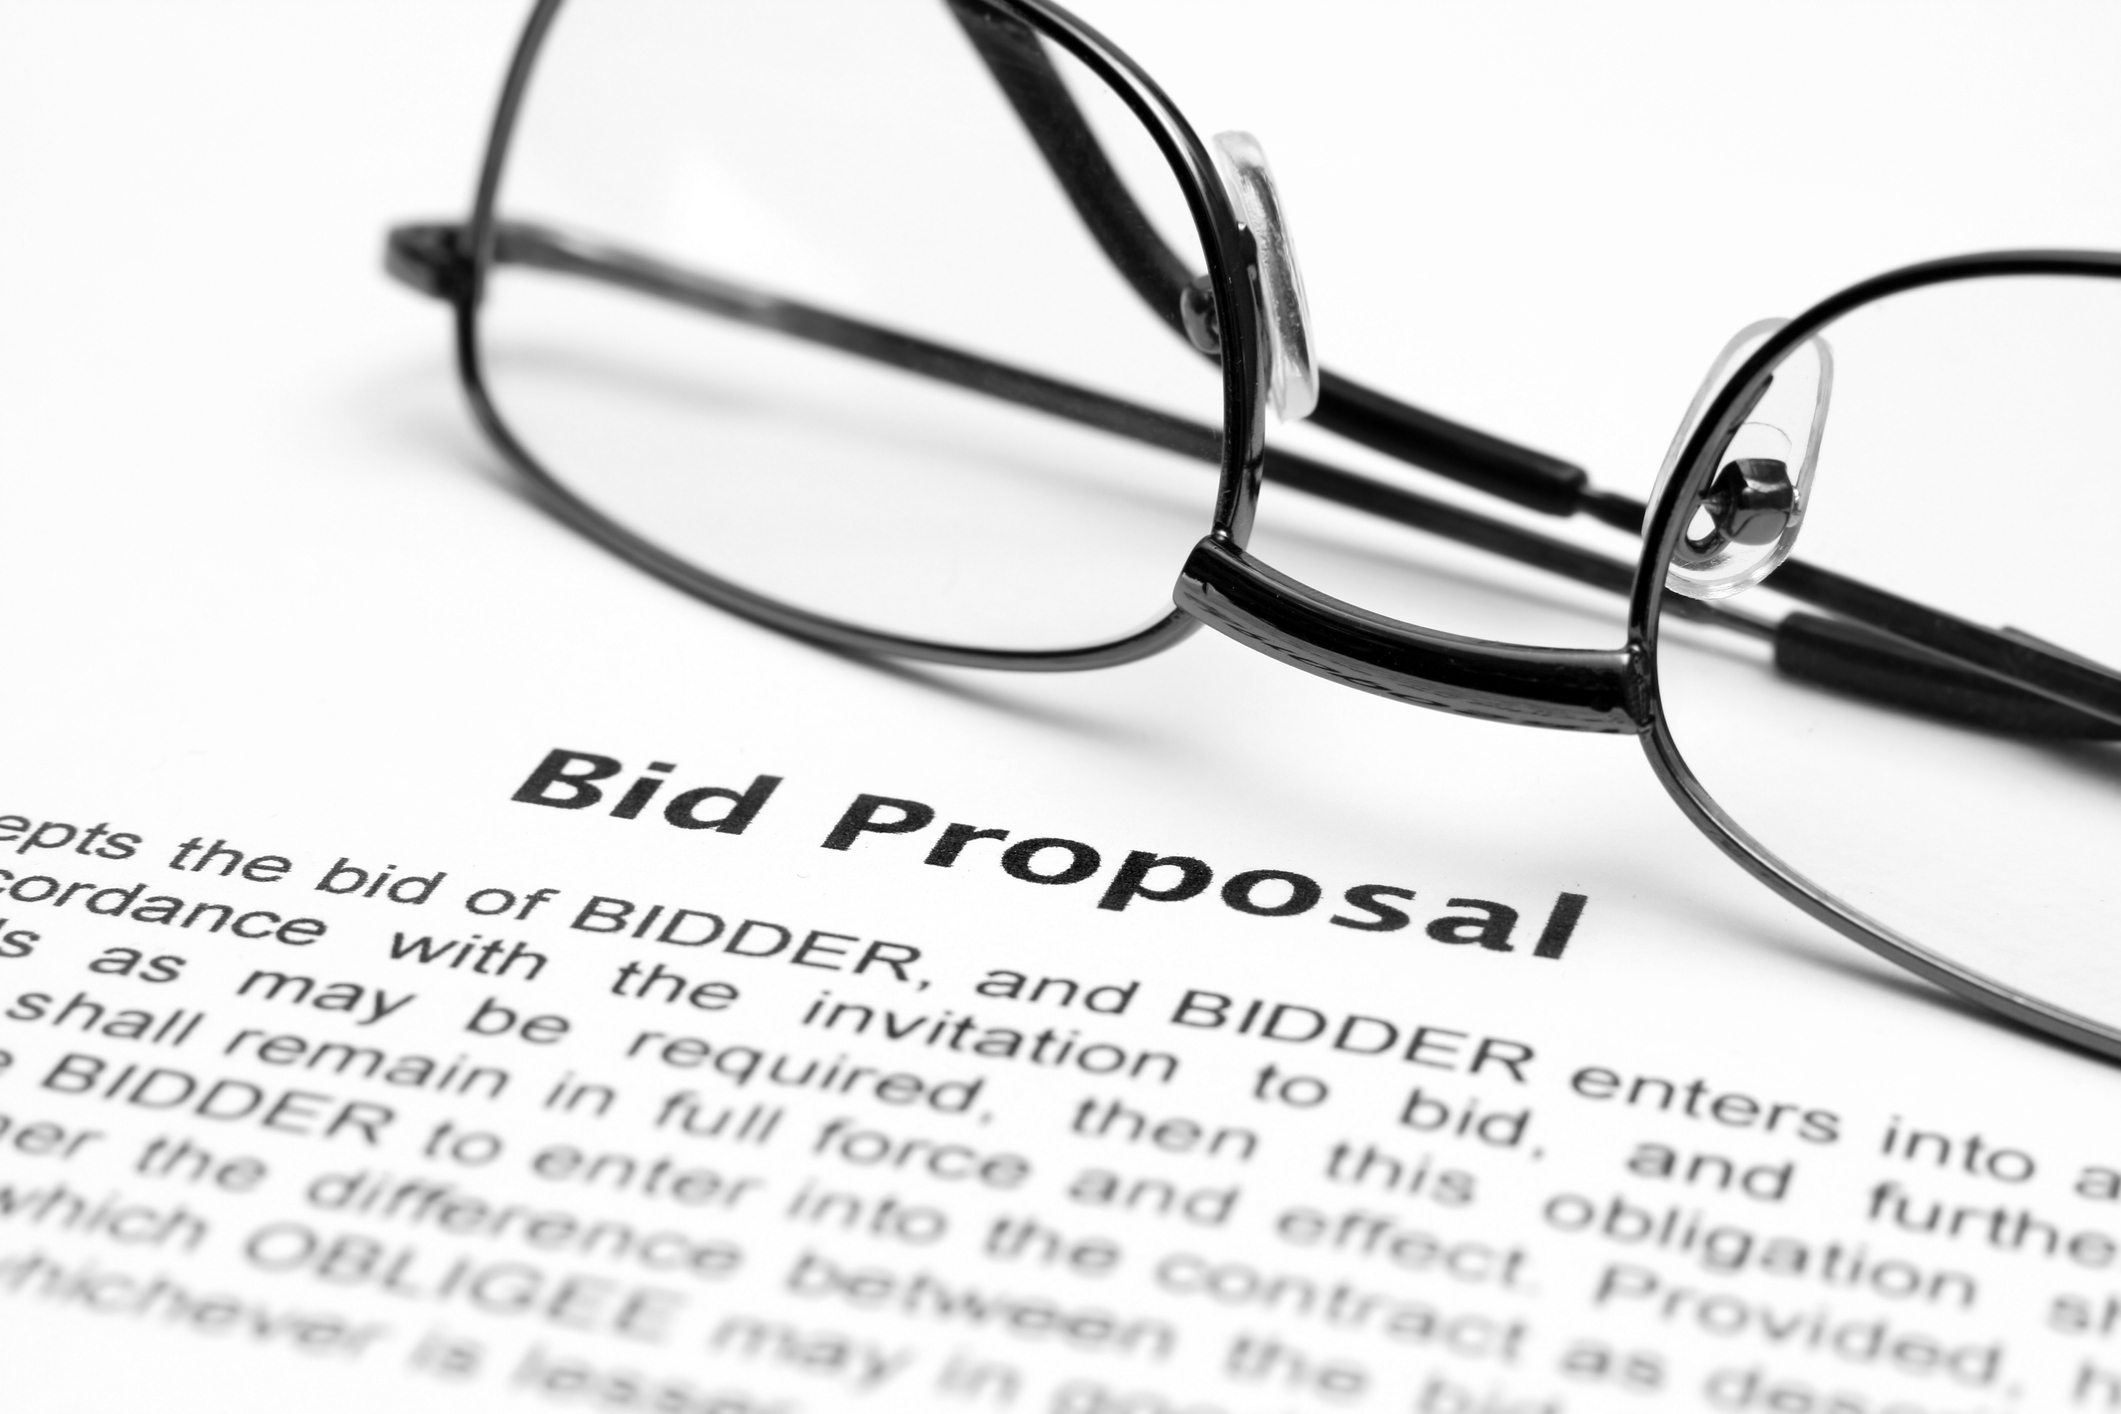 A bid proposal document with a pair of glasses laid on top.